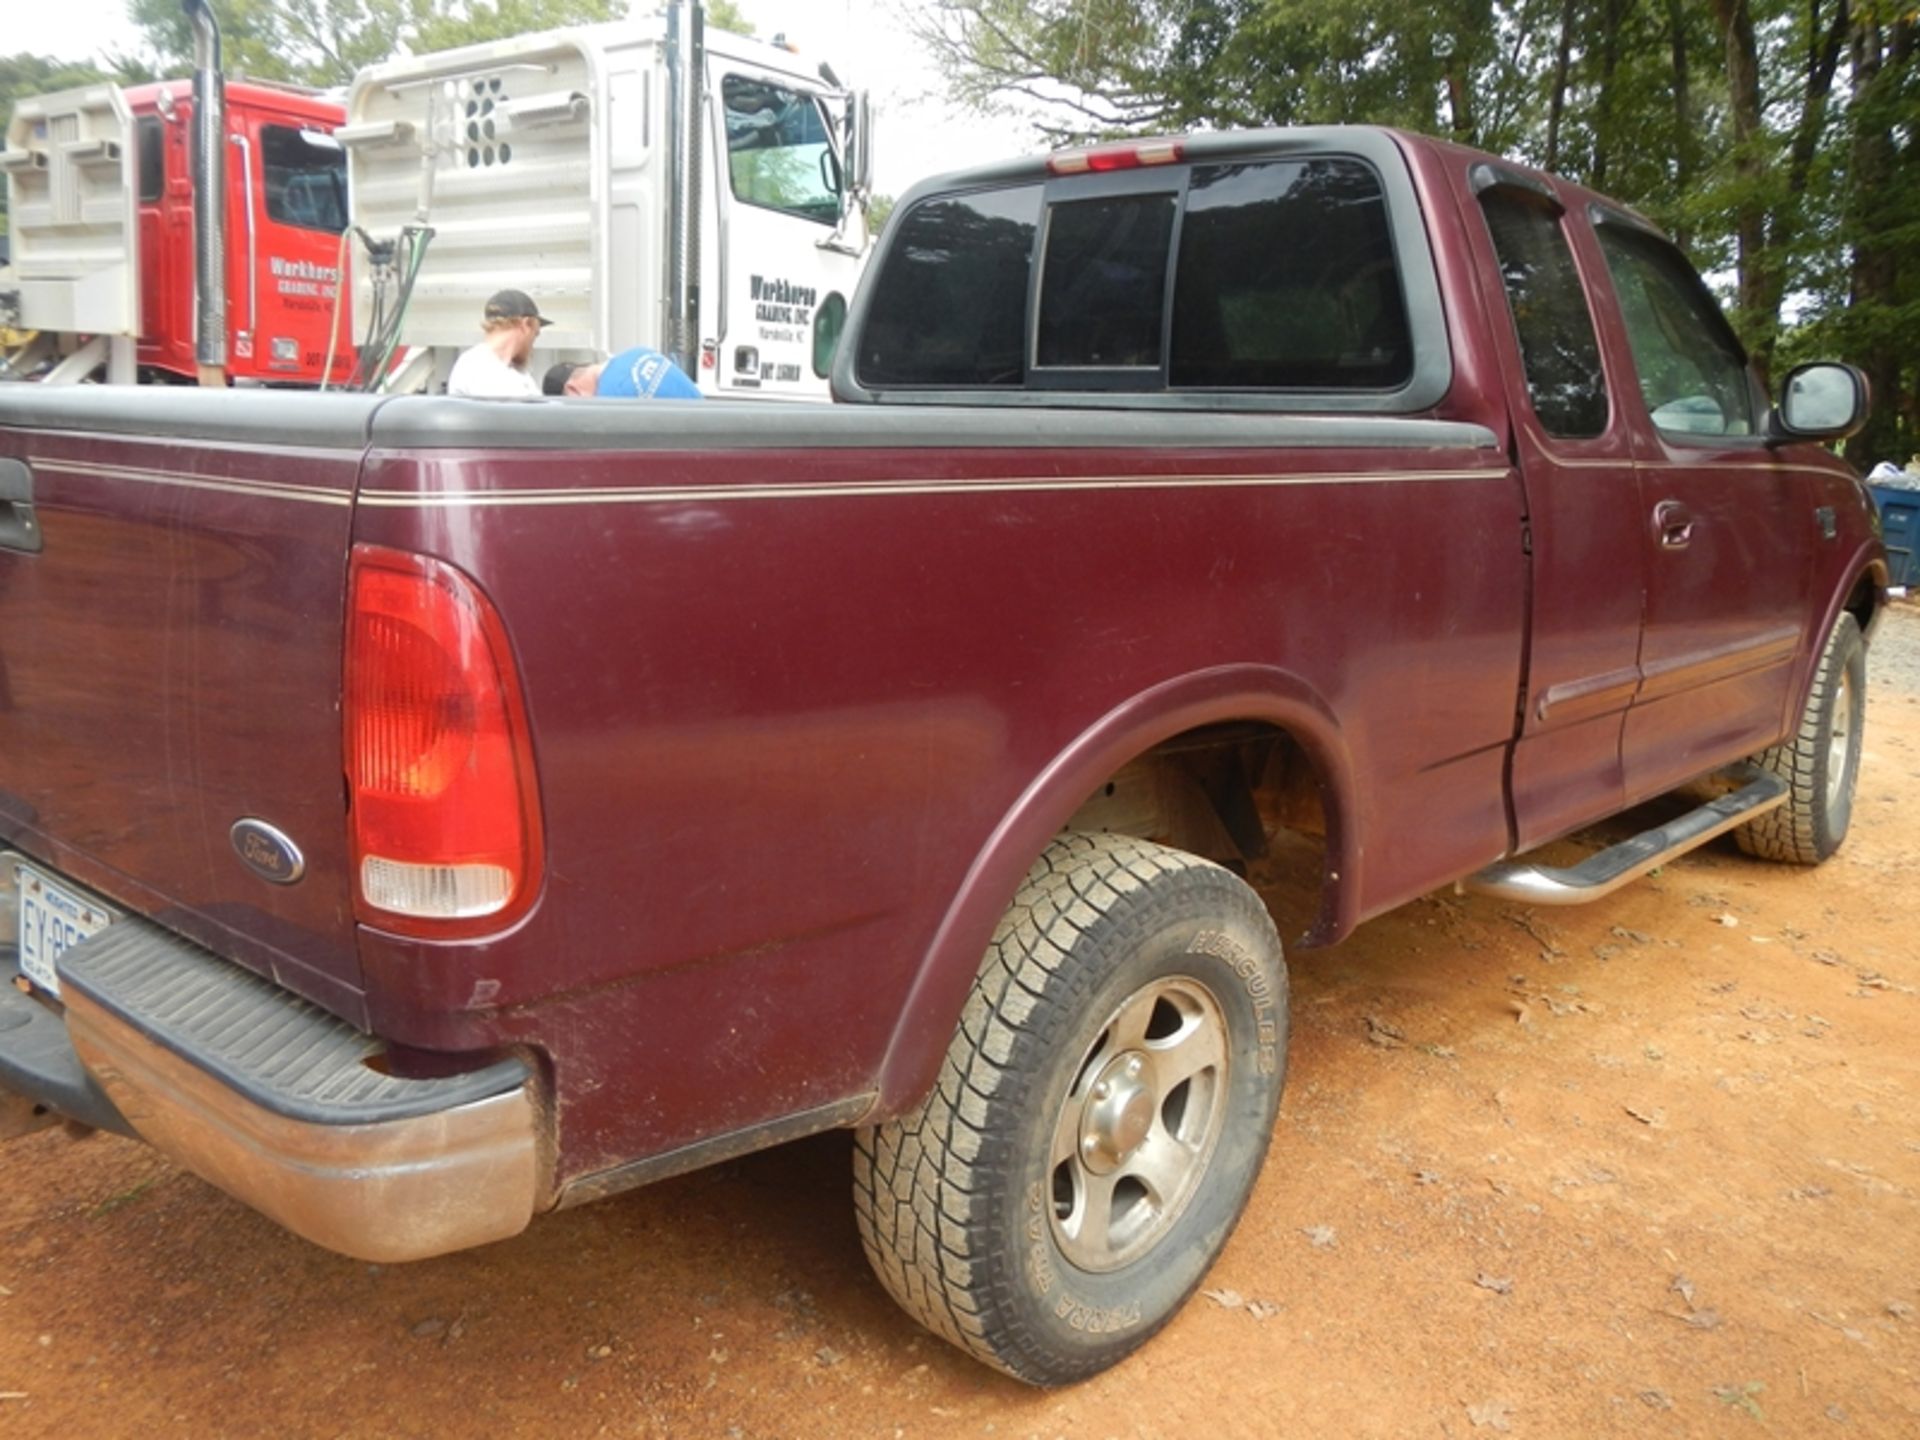 1999 Ford F150 4wd ext cab, vin# 1FTRX18L8XNB62608 - Image 3 of 6